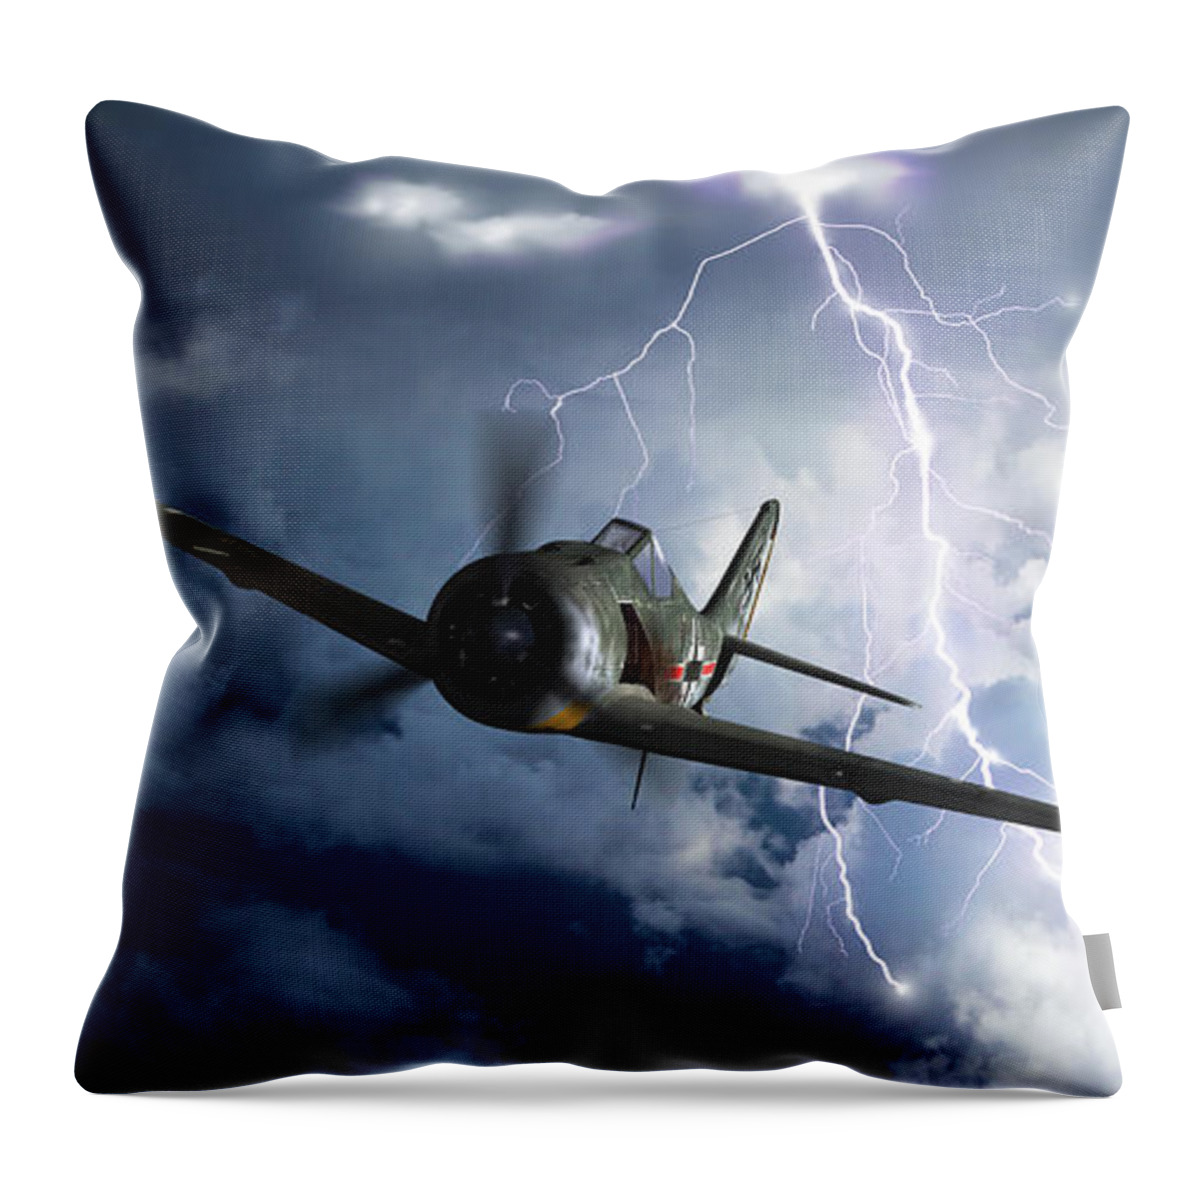 Luftwaffe Throw Pillow featuring the digital art Gathering Storm - Cropped by Mark Donoghue